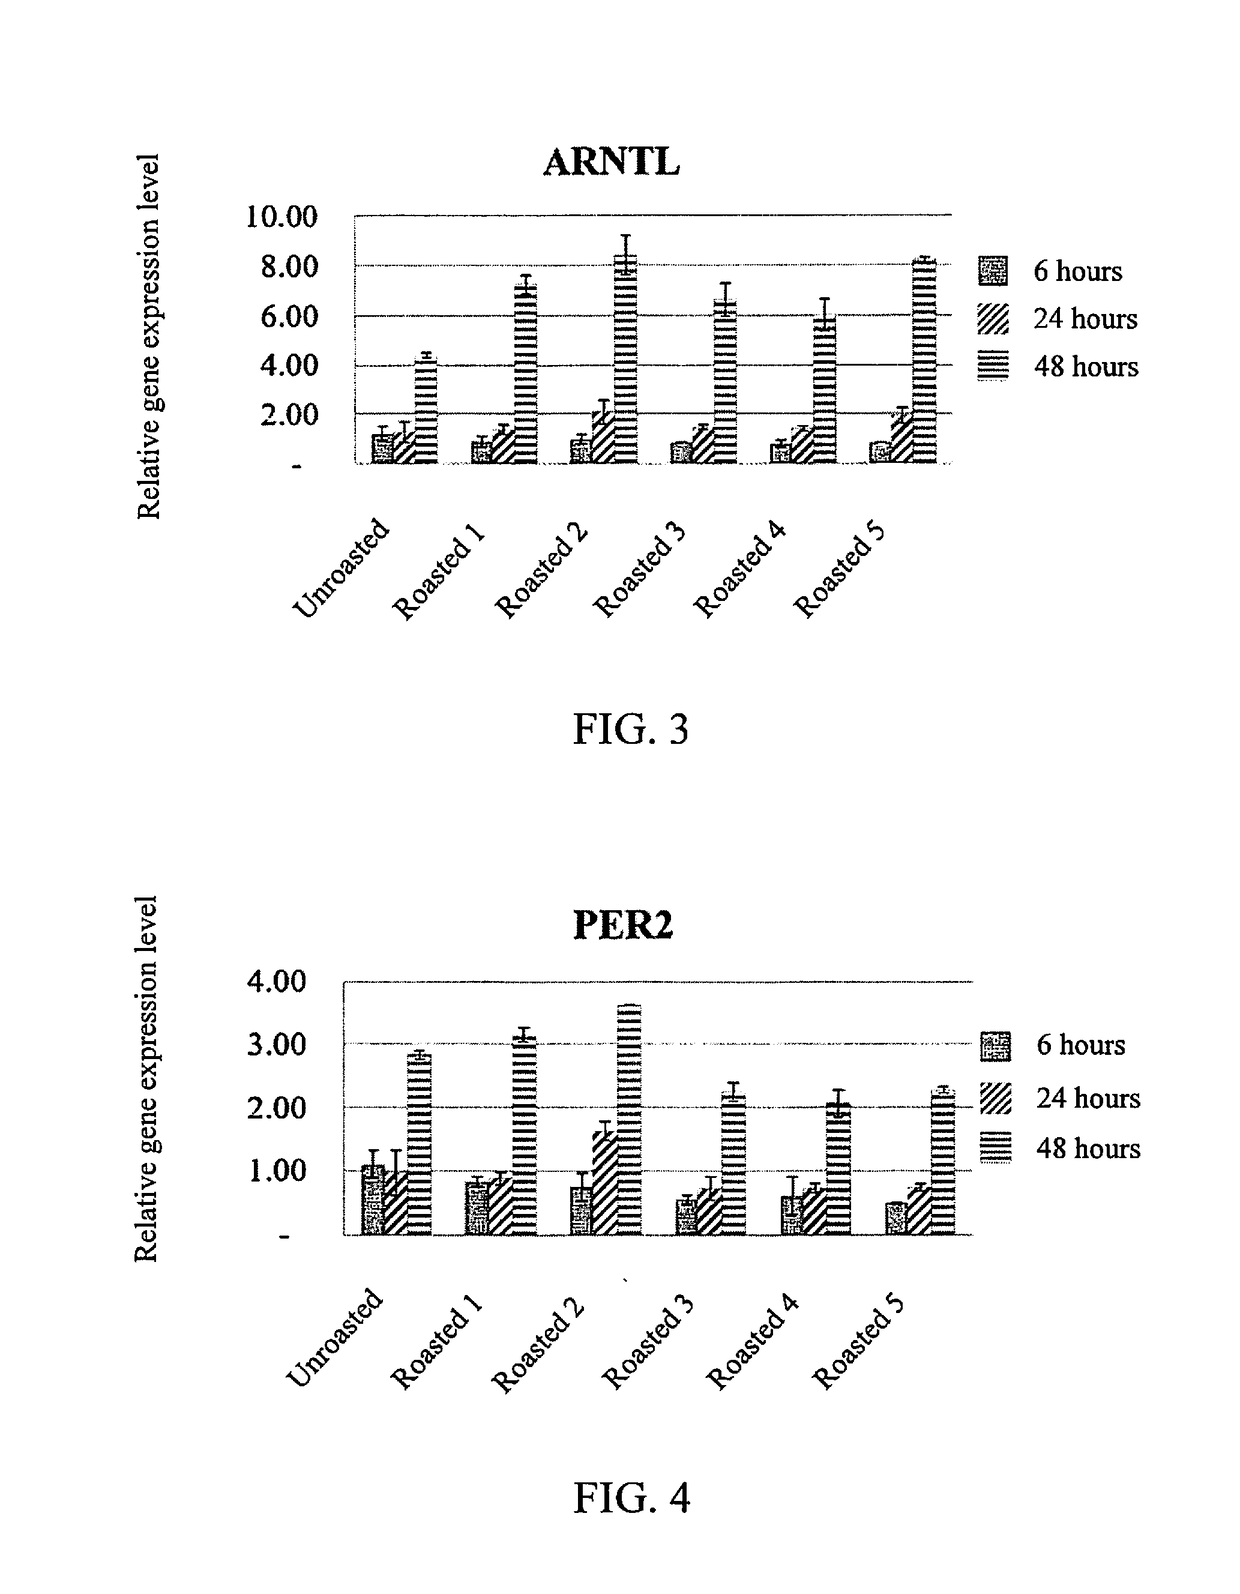 Method for increasing expressions of clock gene, arntl gene, and/or per2 gene by using momordica charantia extract